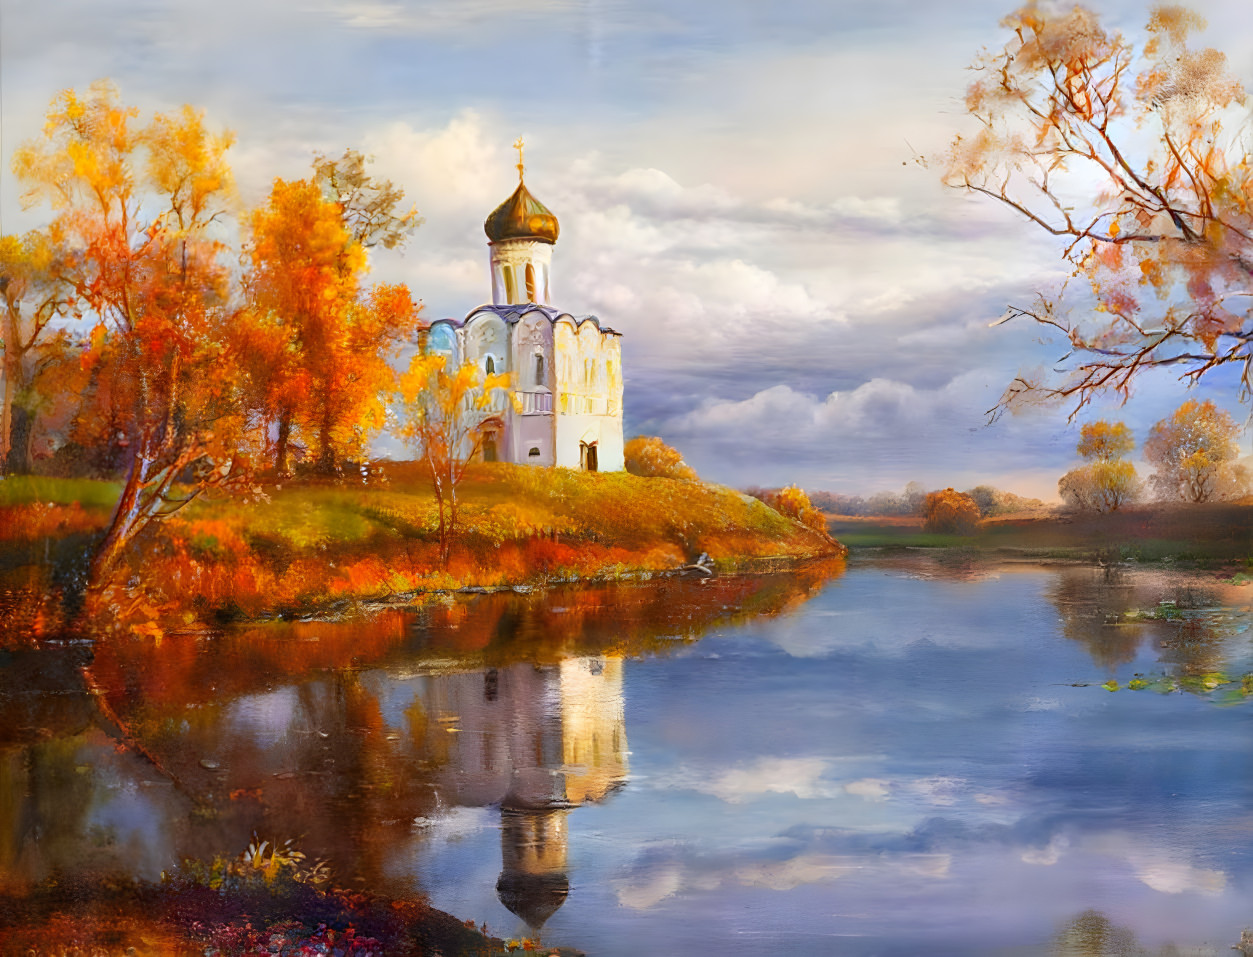 The church of the Intercession on the Nerl river